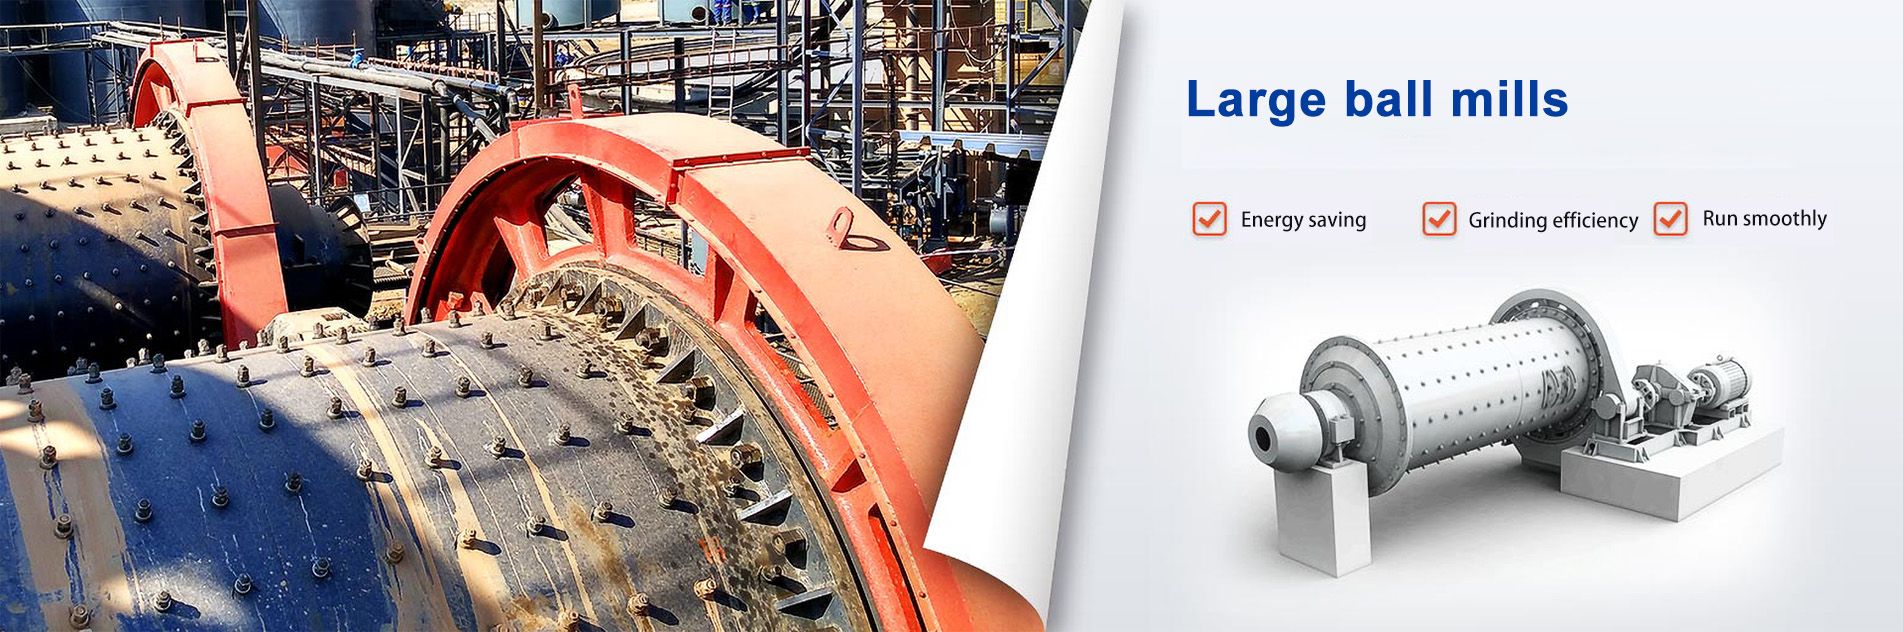 Large ball mill